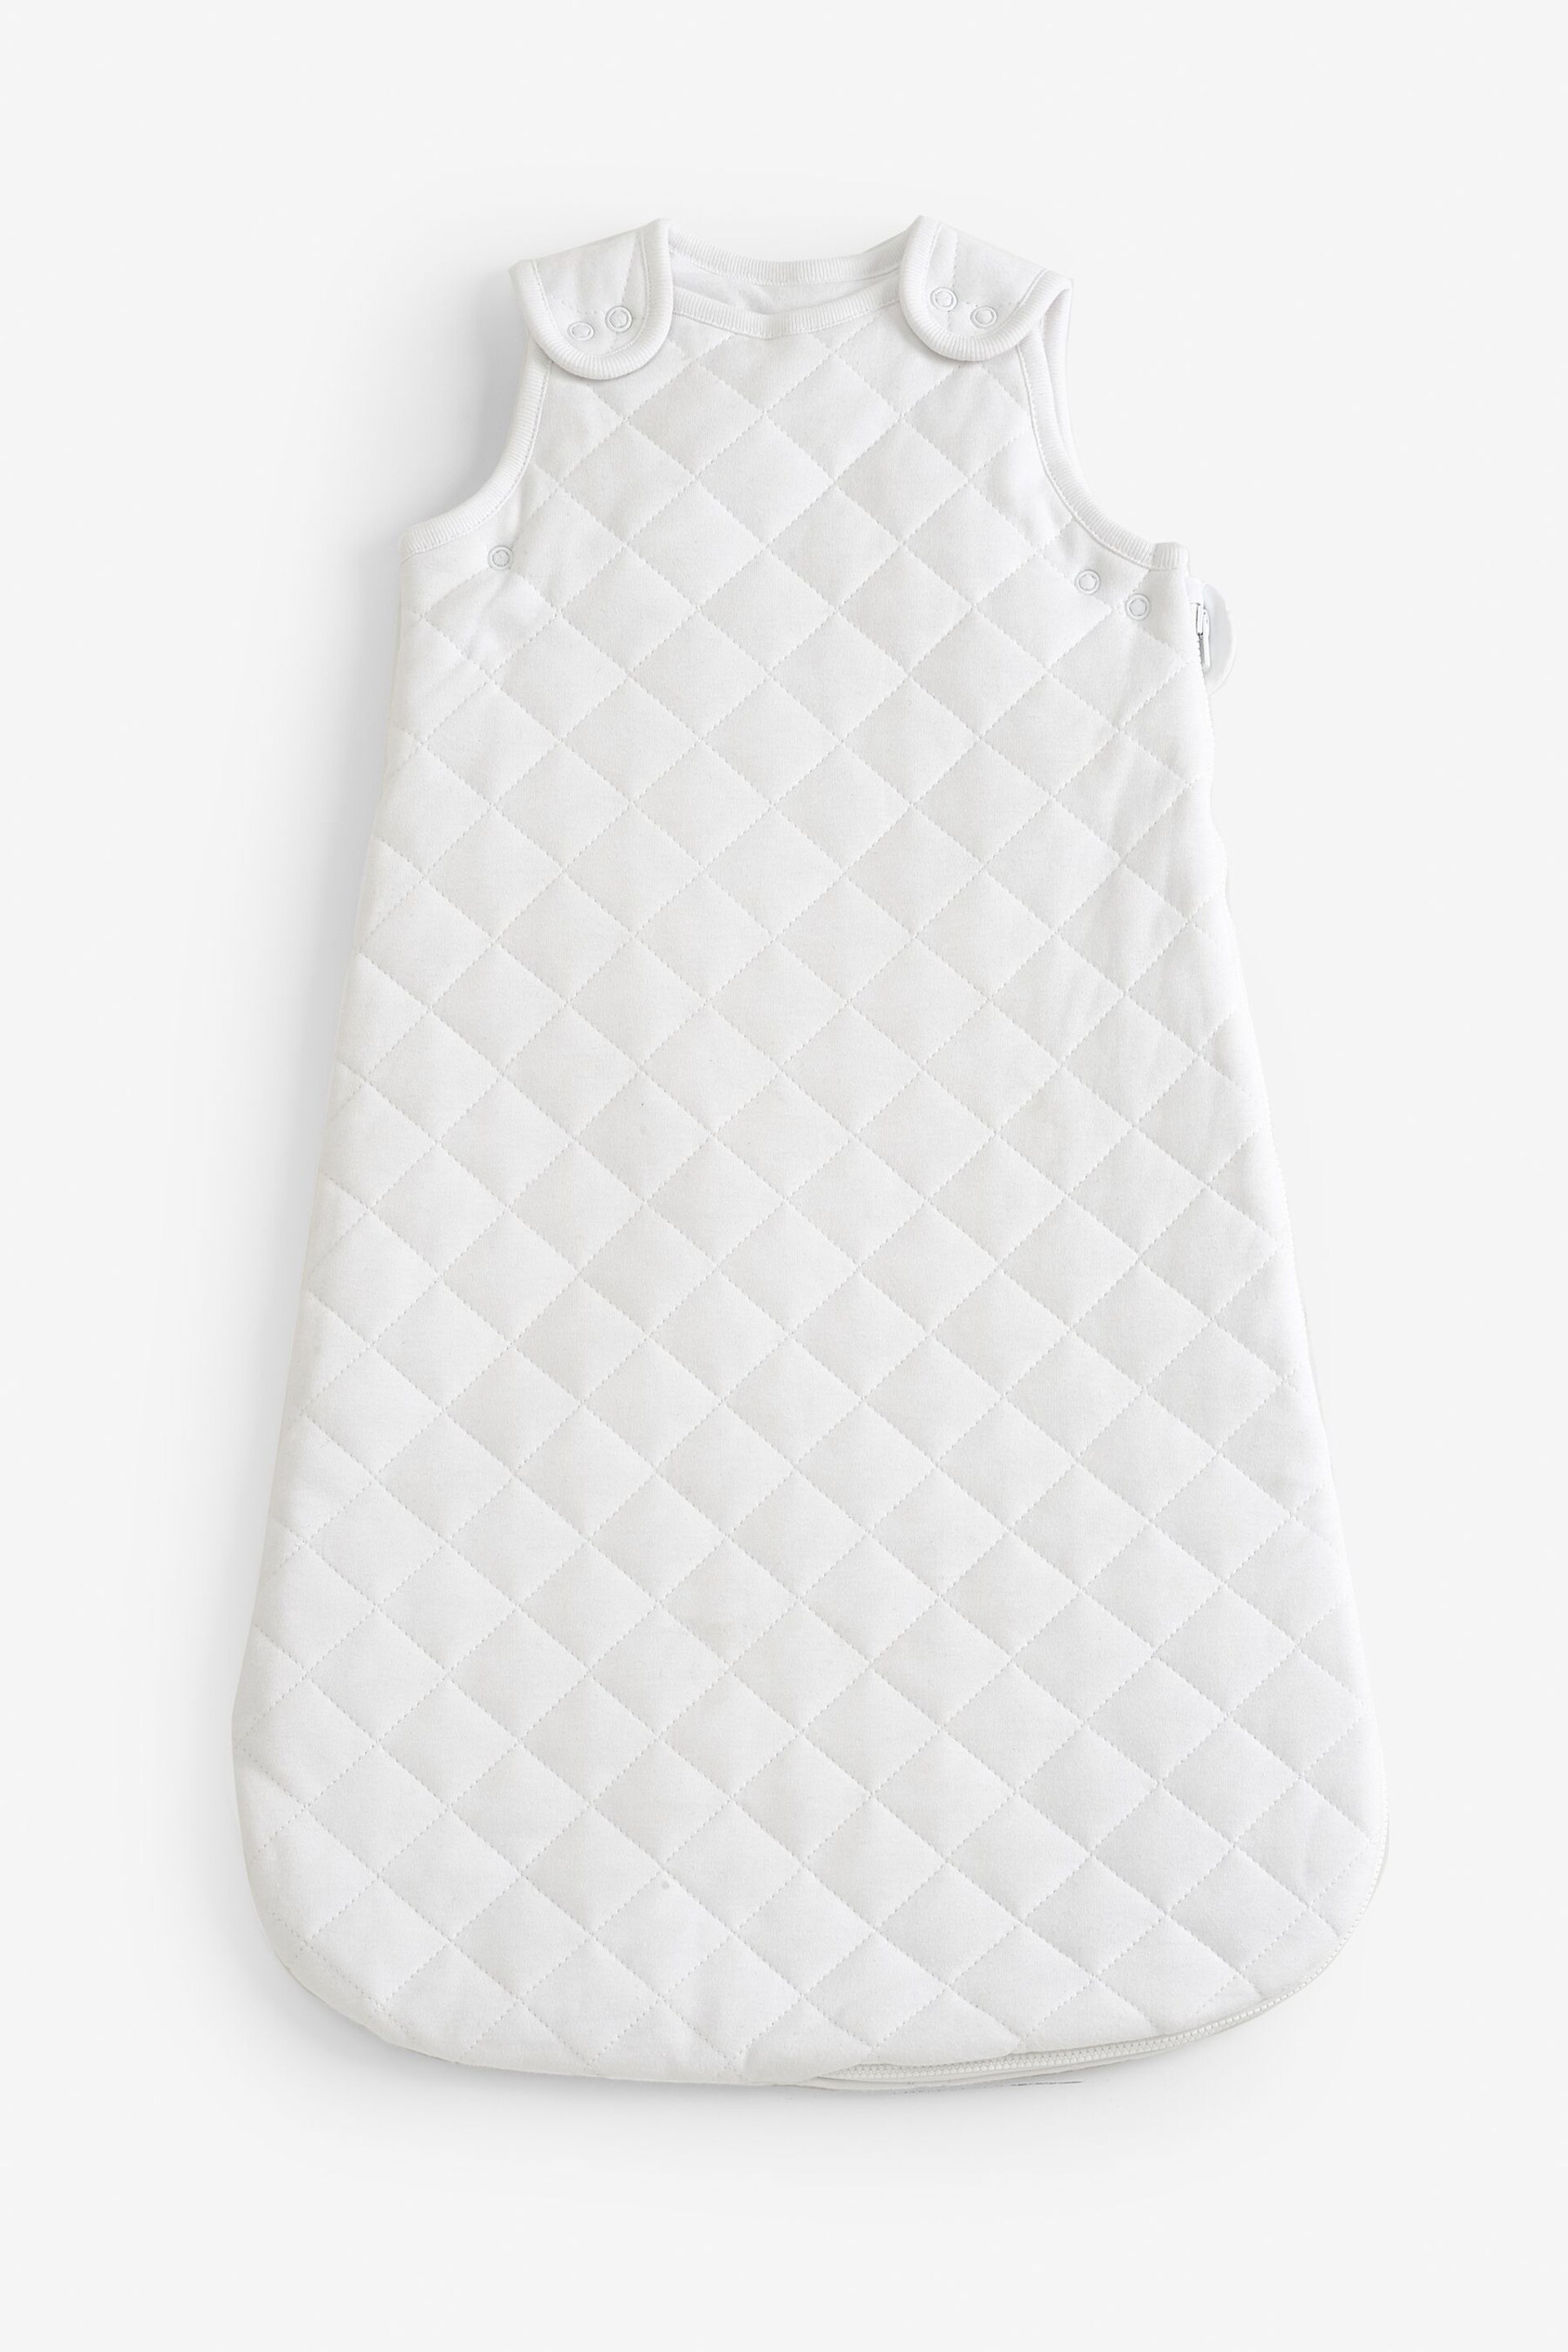 White Quilted 2.5 Tog Baby 100% Cotton Sleep Bag - Image 1 of 6